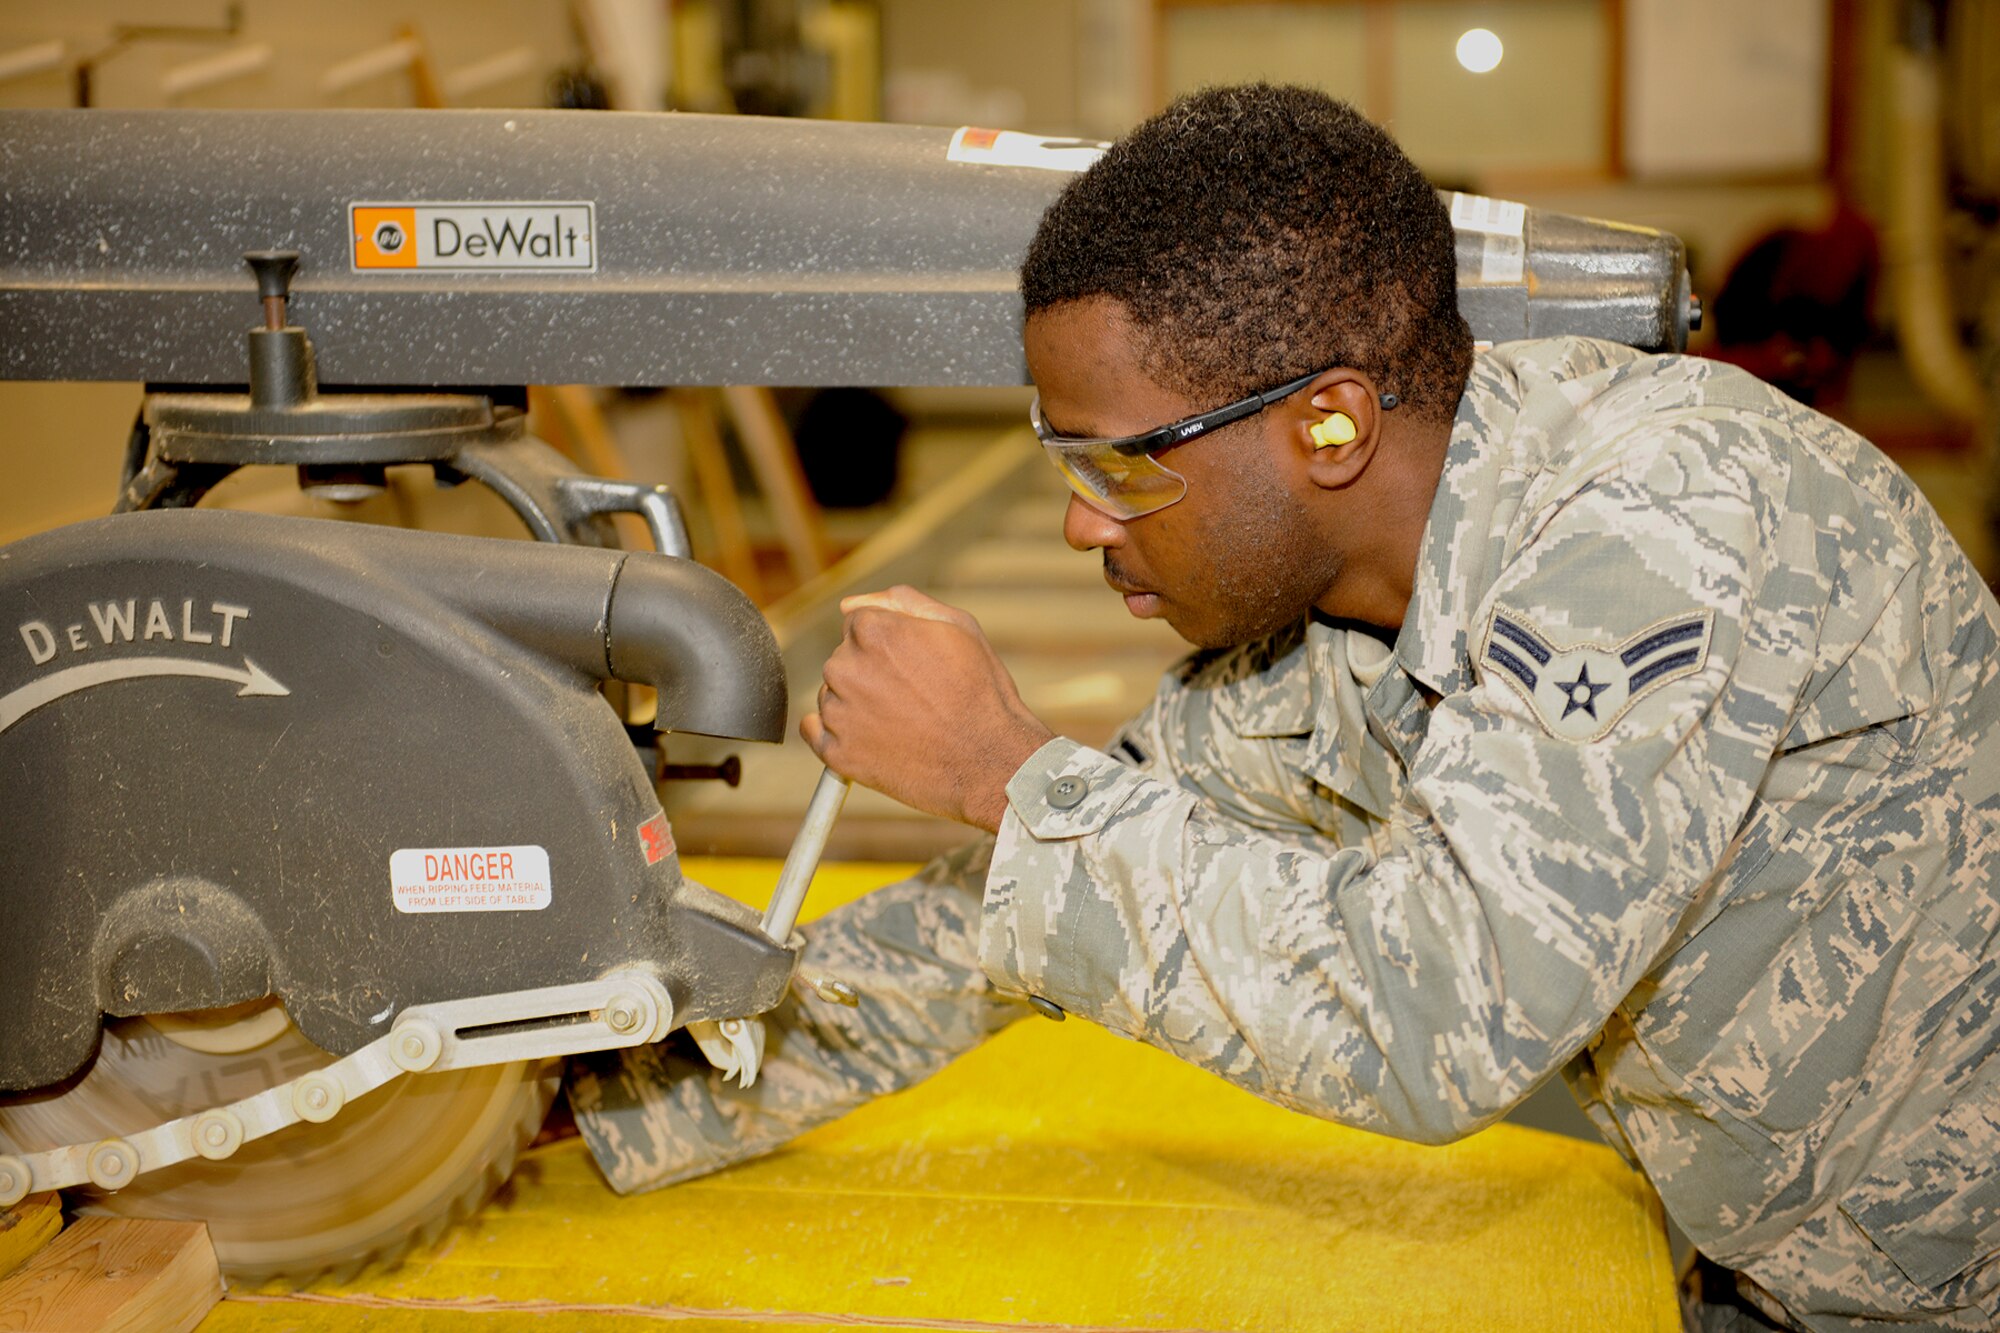 151017-Z-EZ686-018 – Airman 1st Class John Pitts of the 127th Civil Engineering Squadron, Selfridge Mich., is cutting some wood with a table saw at Selfridge Air National Guard Base Mich., October 17, 2015.  Pitts is a newly affiliated member of the CE Squadron, who recently graduated from technician school where he learned the art of working on buildings and structures.  (U.S. Air National Guard photo by MSgt. David Kujawa/Released)